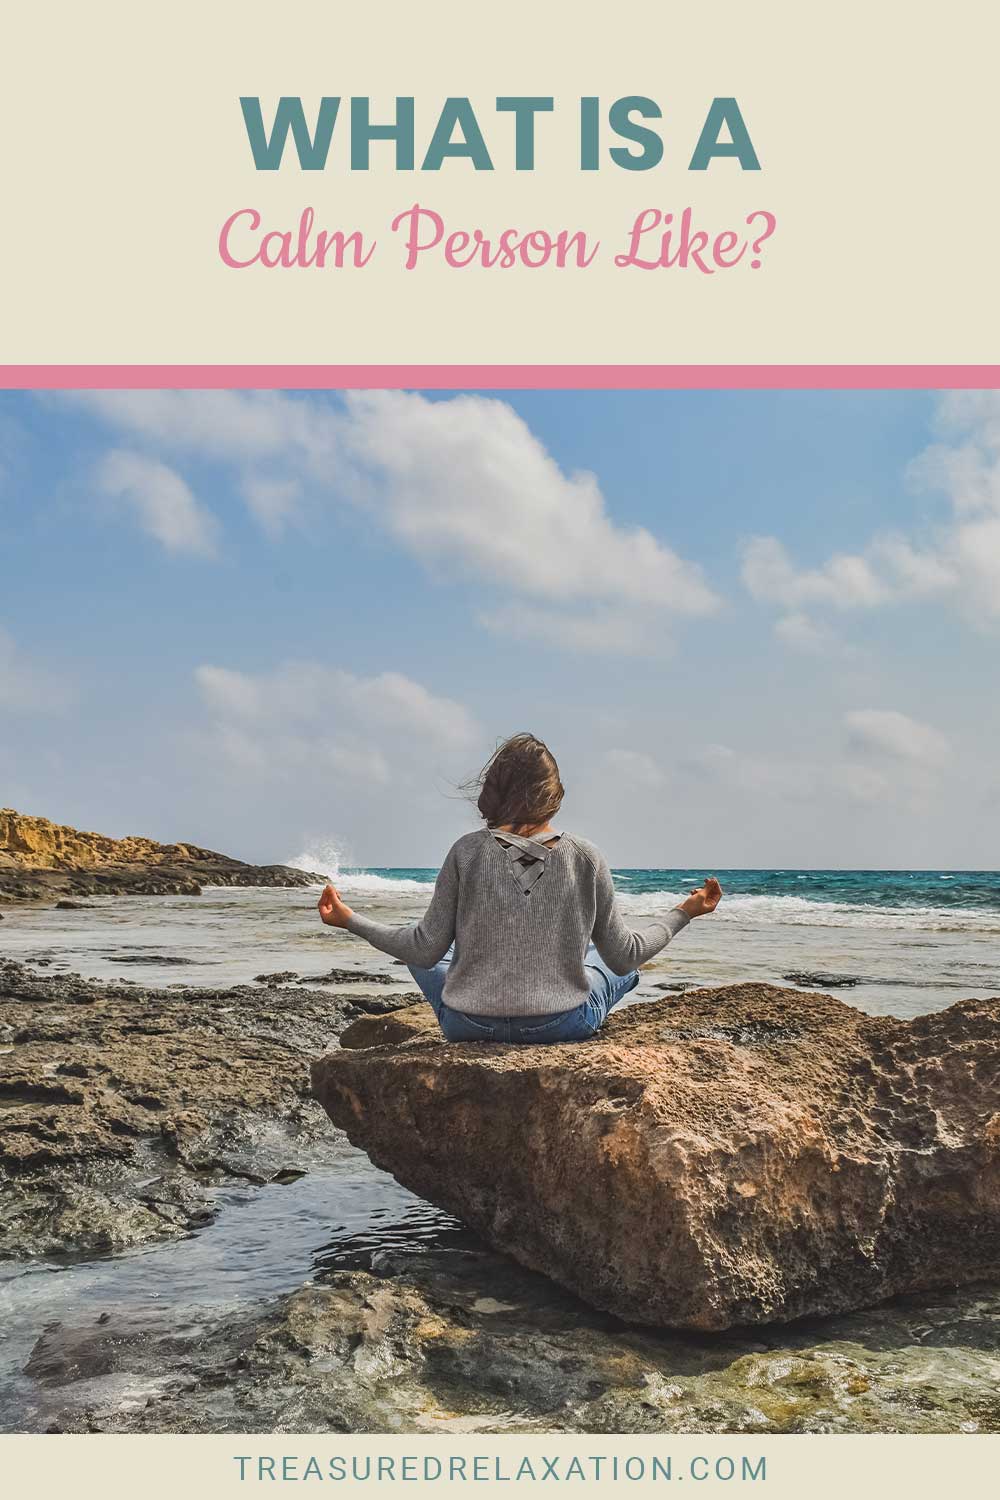 What is a Calm Person Like?